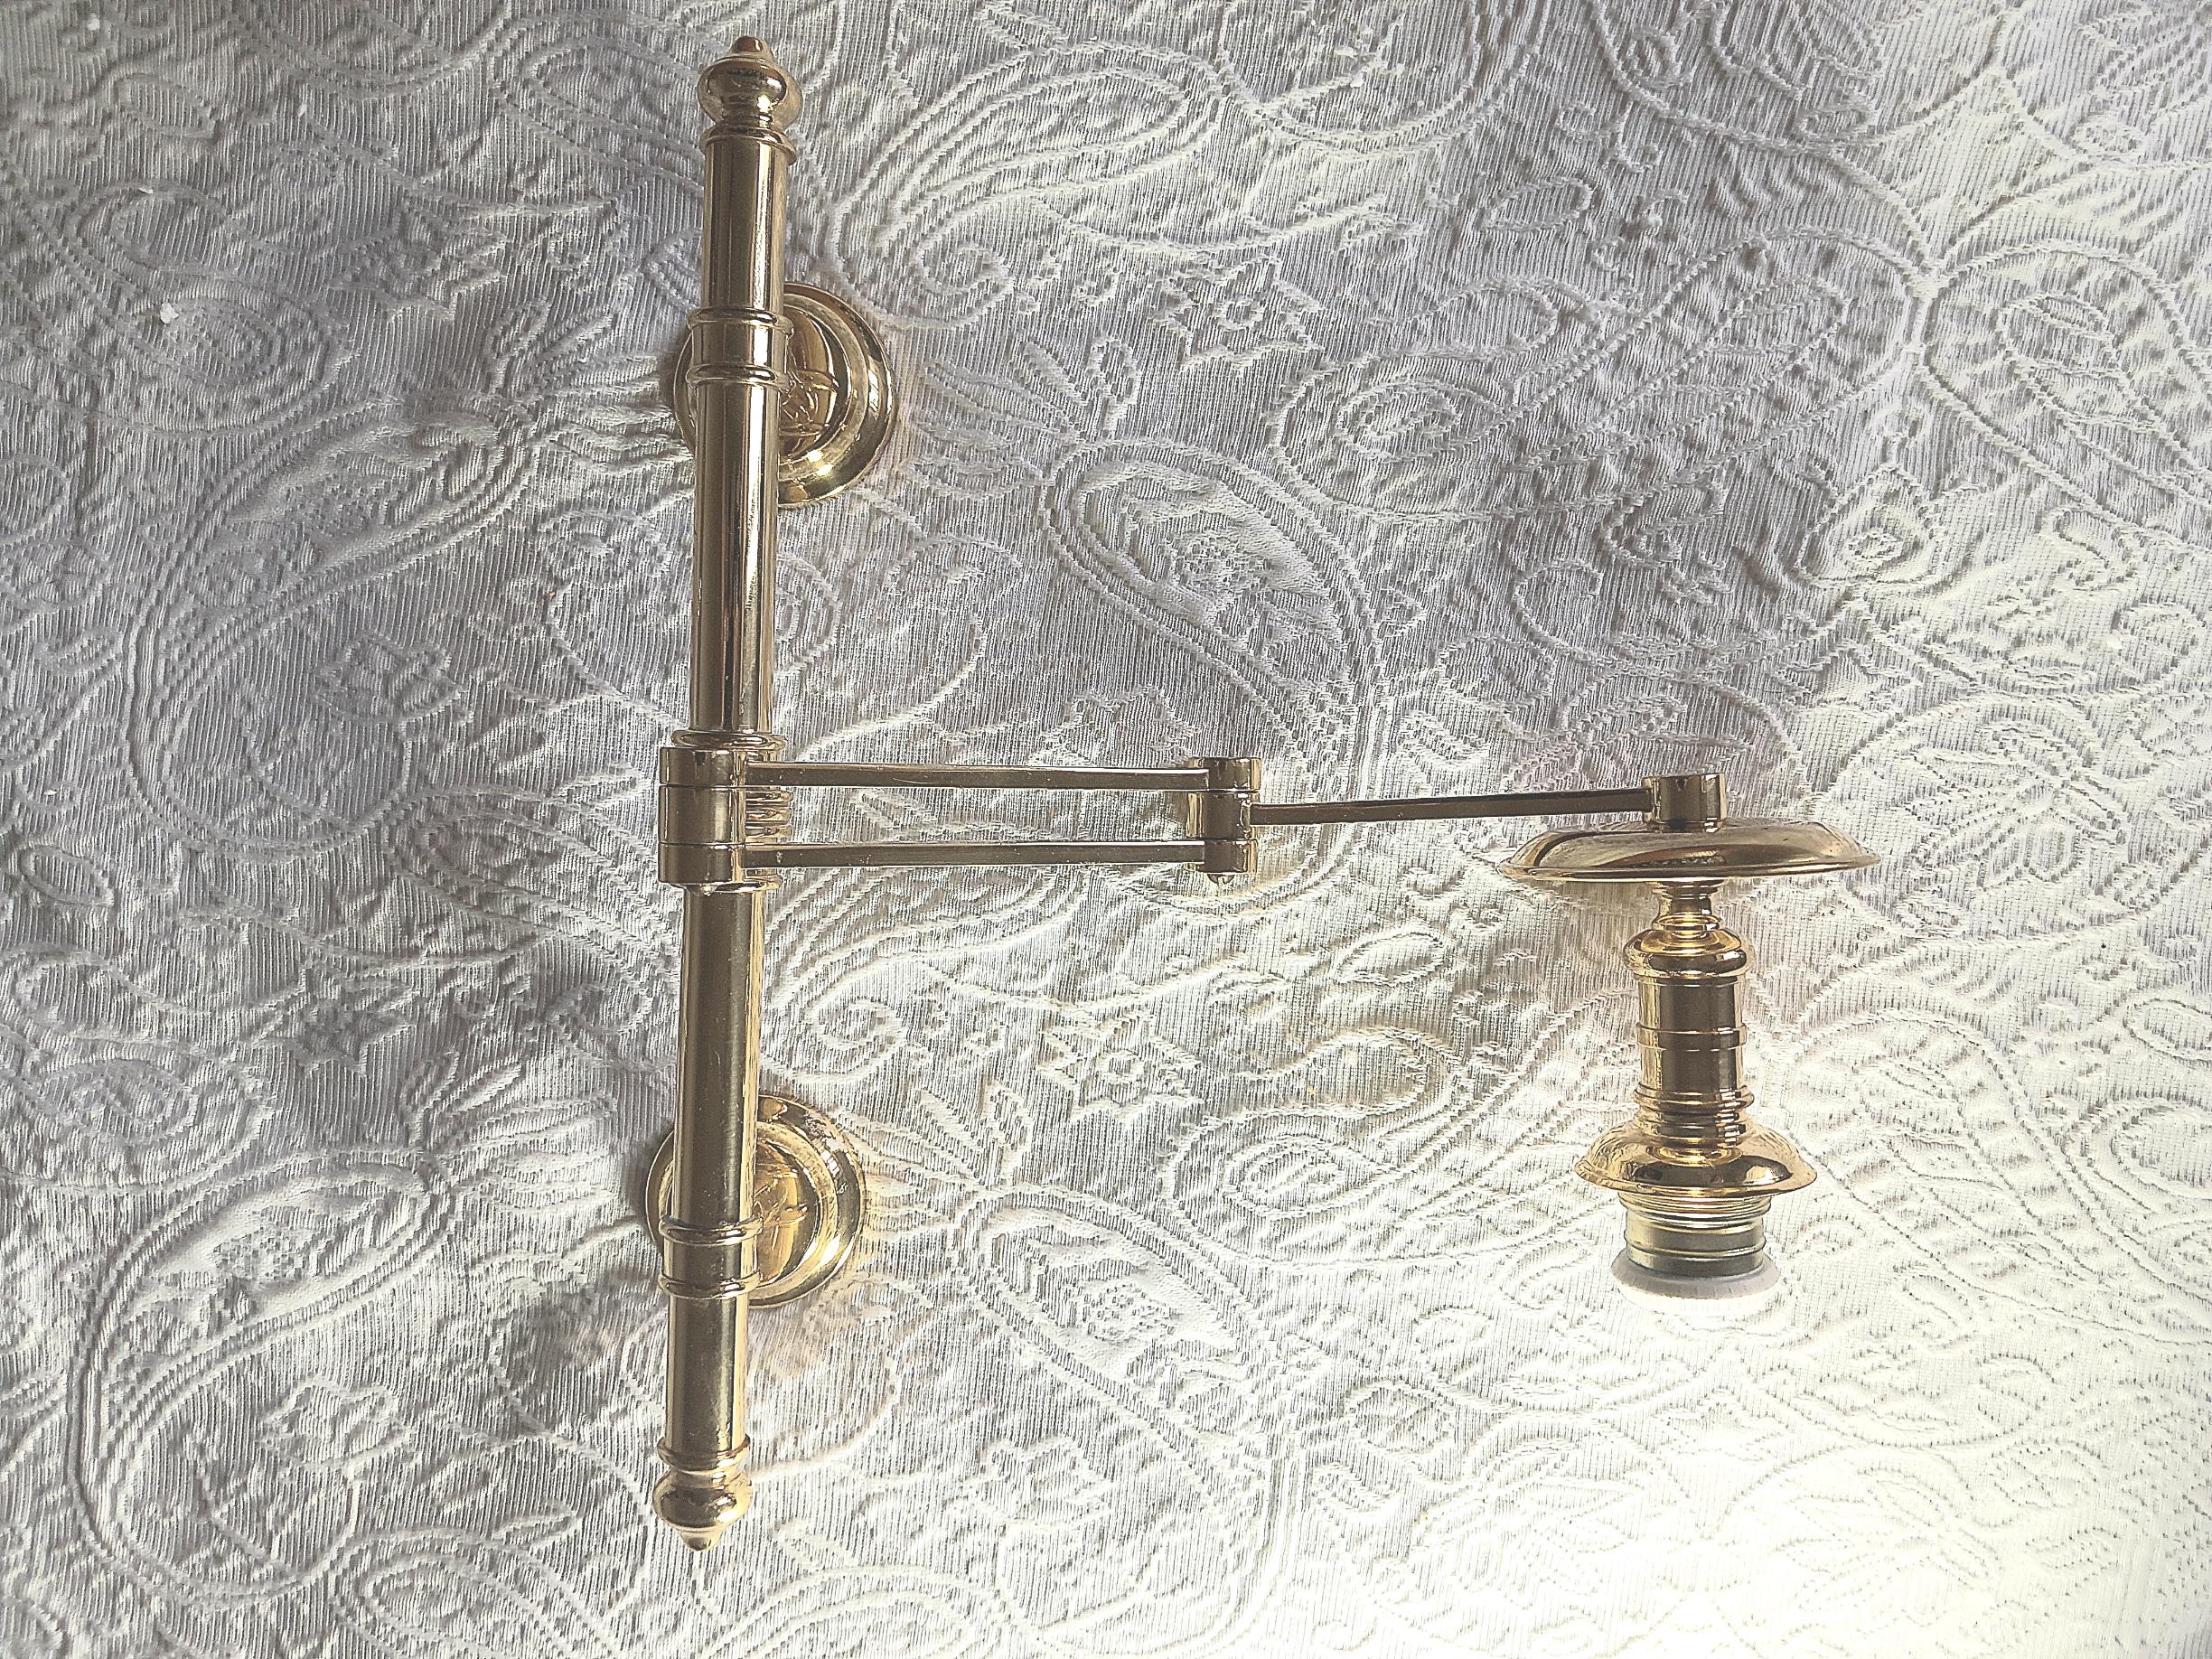  Pair of French Maison Jansen Swing Arm Sconces For Sale 13